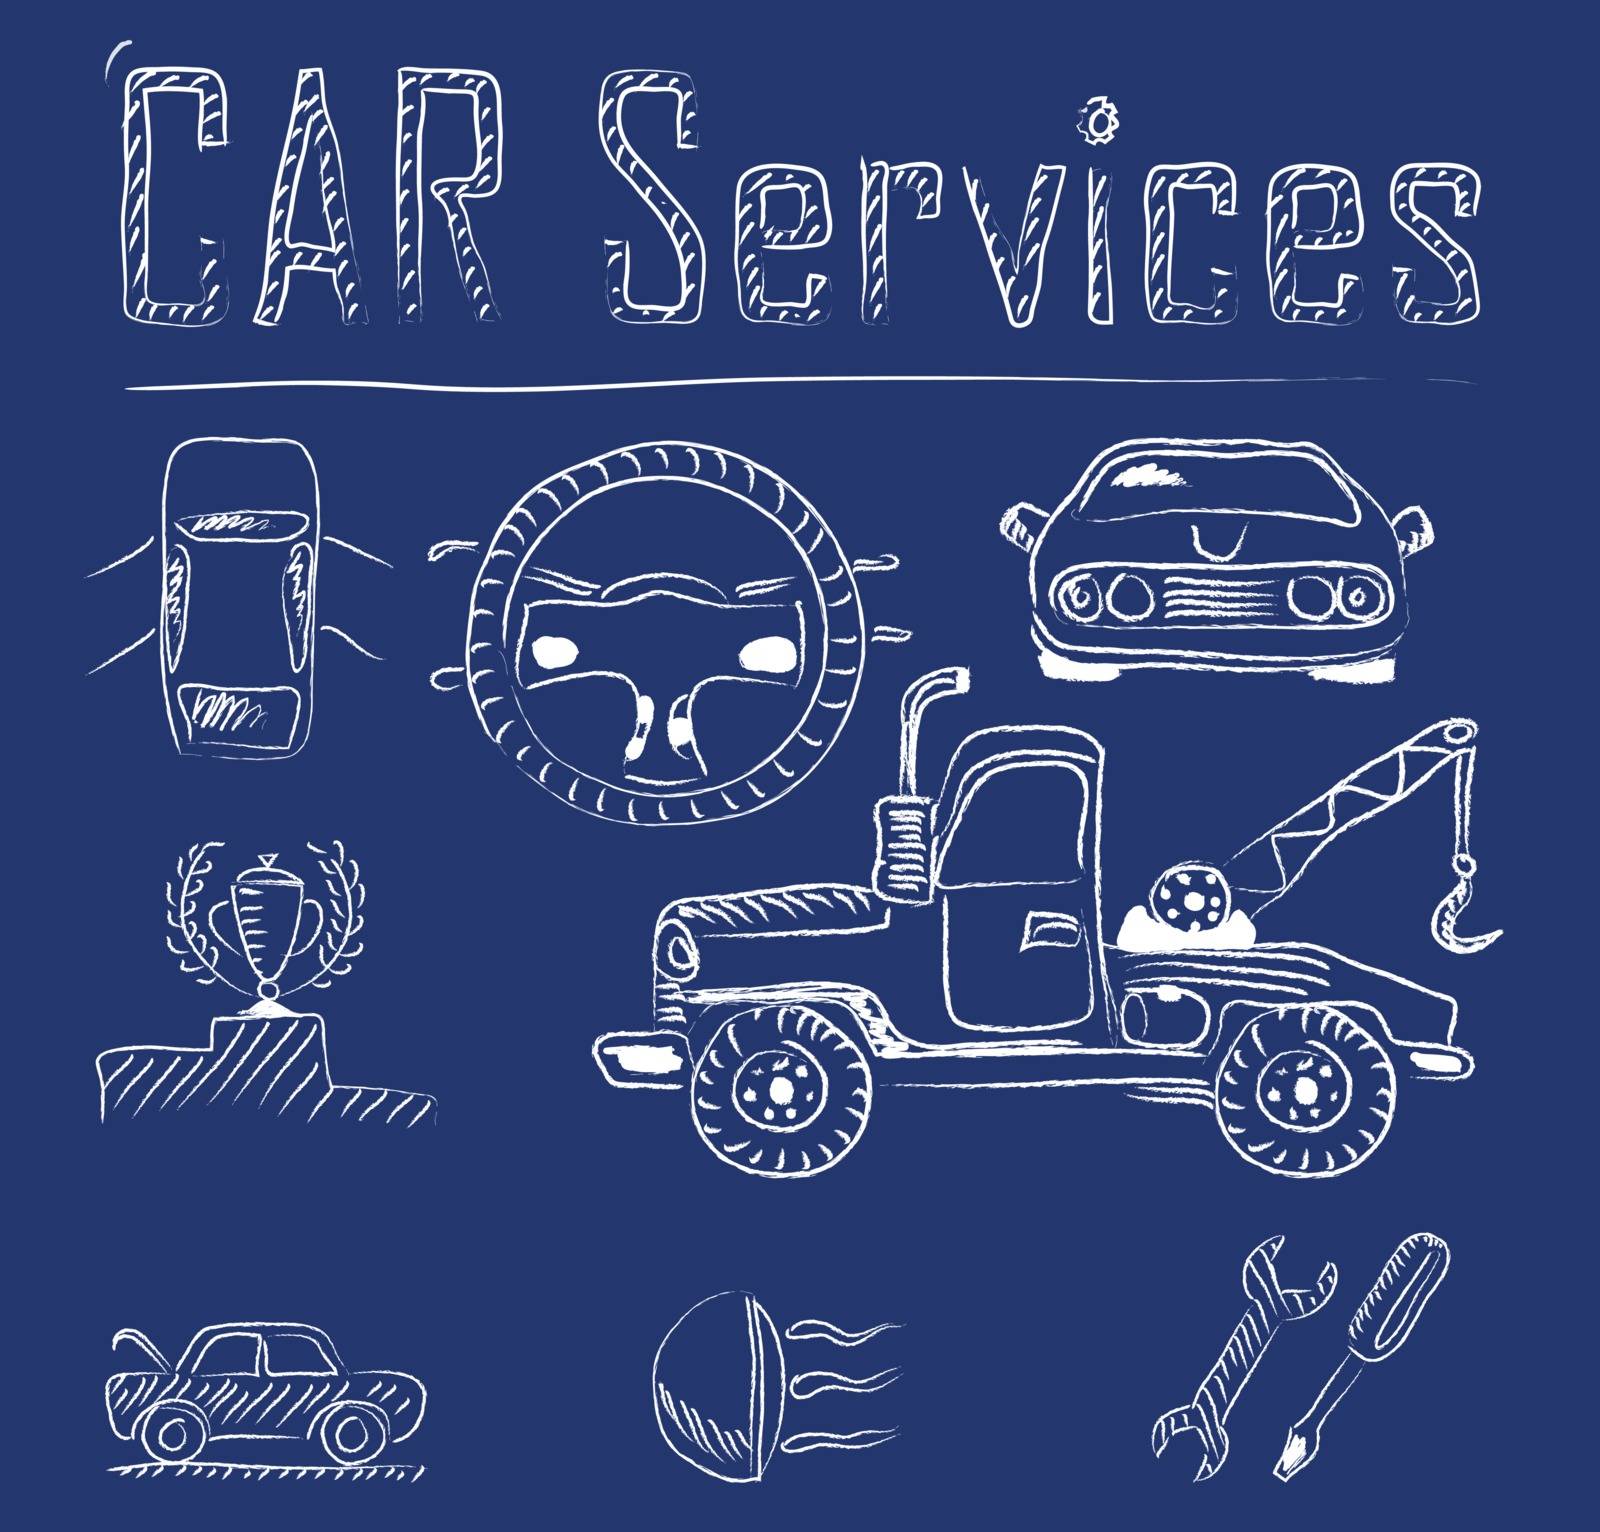 Car service icons by ayax